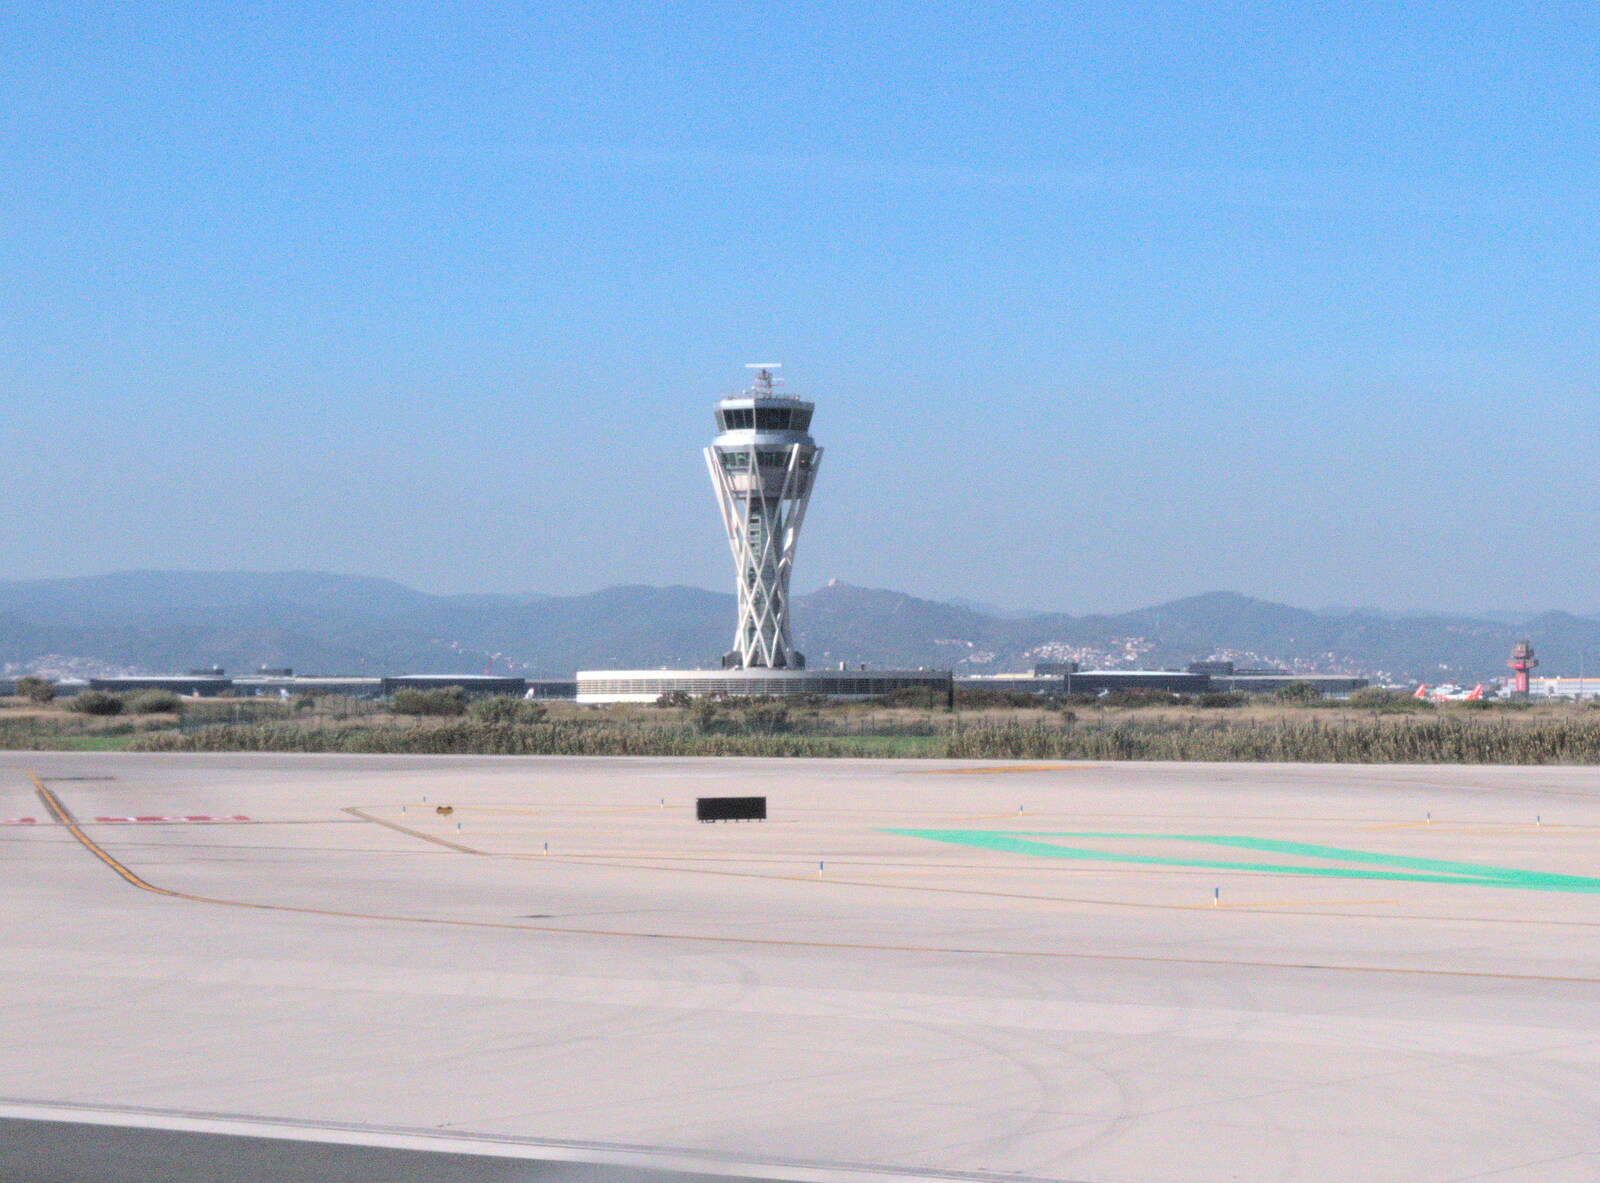 The 'Olympic torch' control tower from A Barcelona Bus Tour, Catalonia, Spain - 25th October 2017